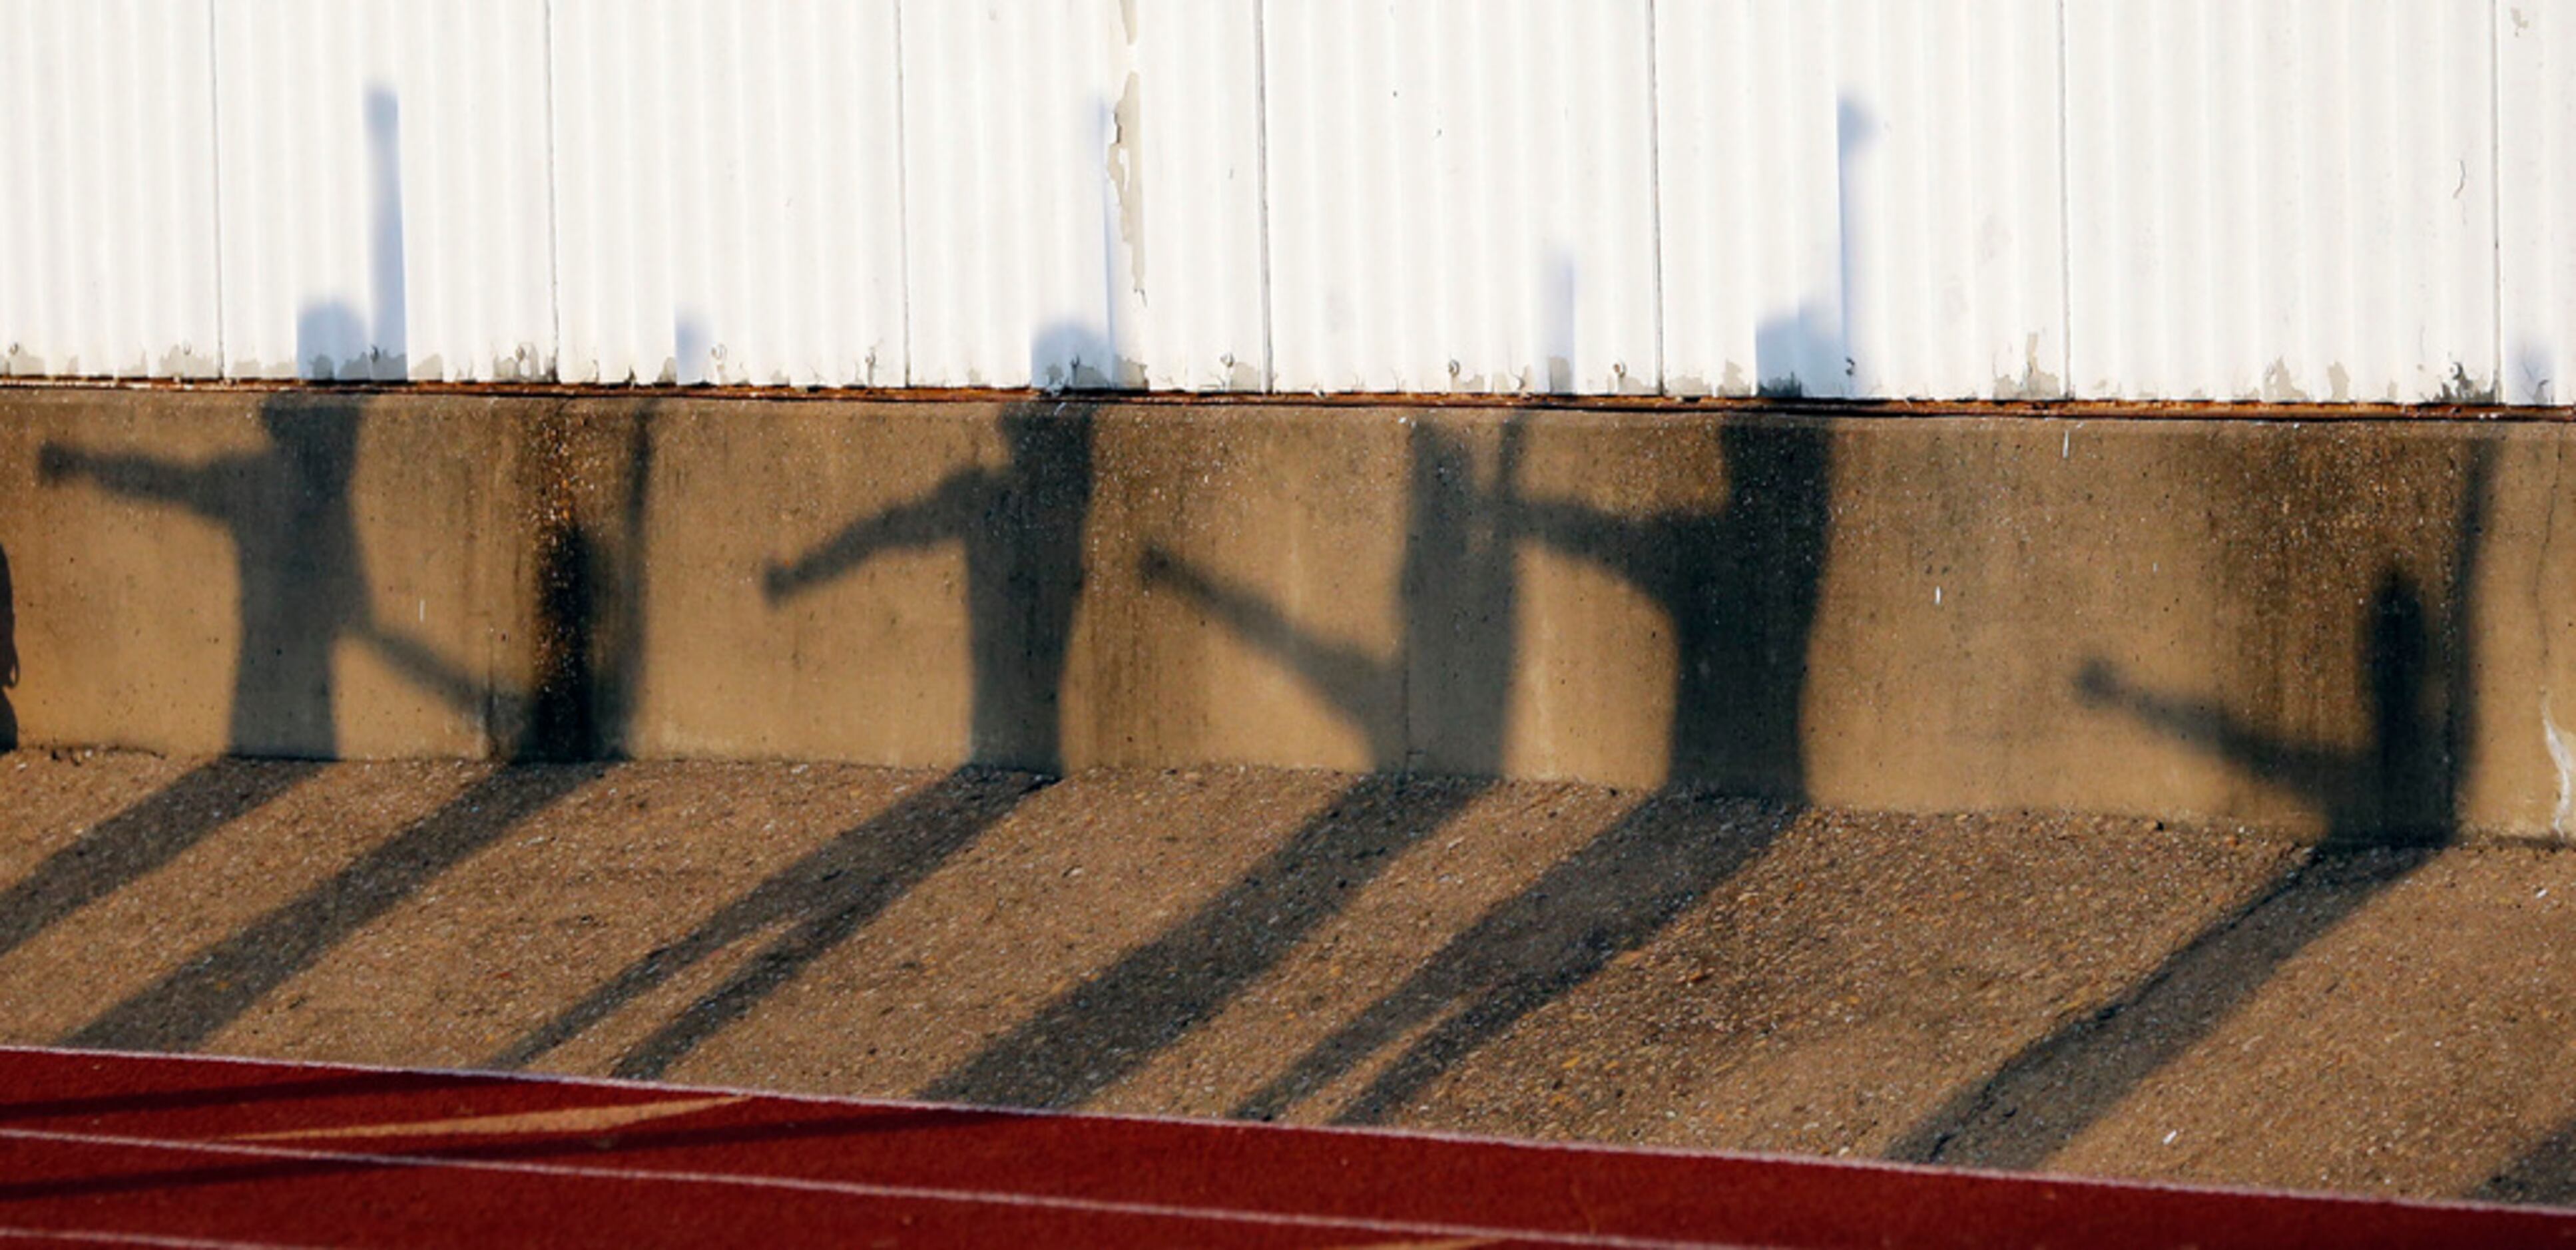 The Irving high cheerleader's shadows workout before the start of their team's during high...